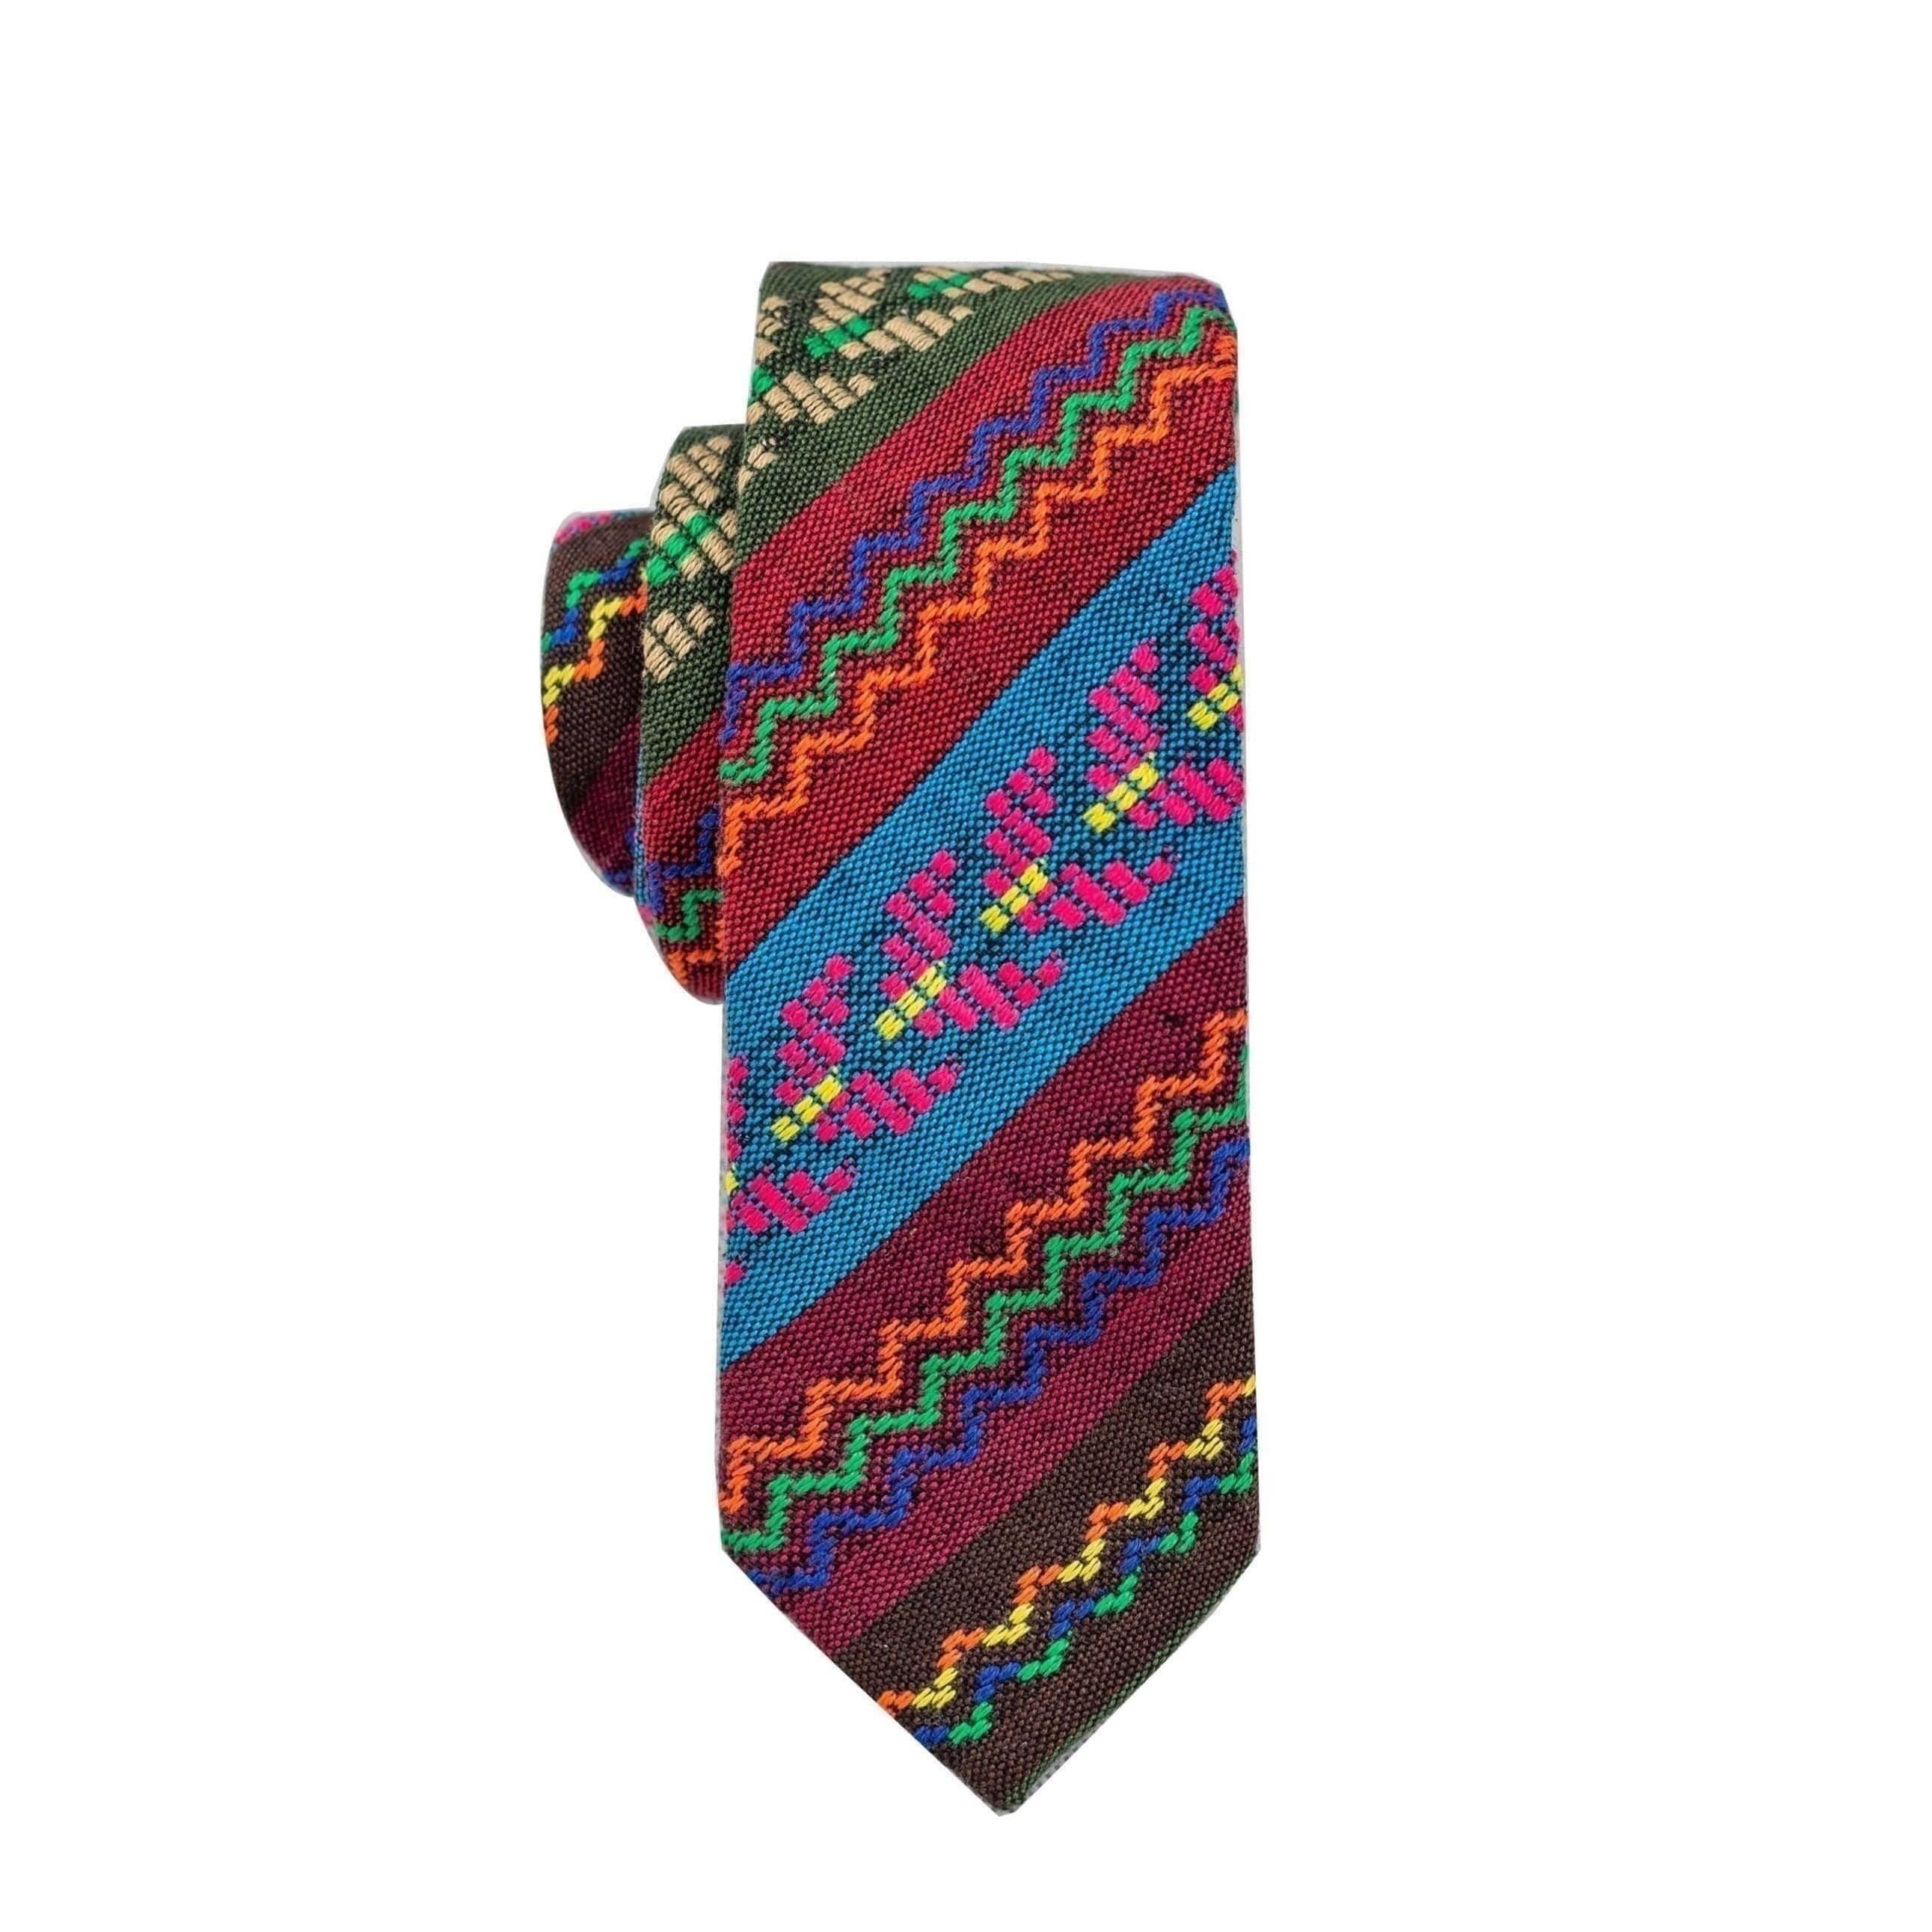 Colorful Skinny Tie Aztec print Mytieshop - COYOTE-Neckties-Colorful Skinny Tie Aztec print Floral Necktie for weddings and events great for prom and gifts Mens ties near me us tie shops cool skinny slim flower-Mytieshop. Skinny ties for weddings anniversaries. Father of bride. Groomsmen. Cool skinny neckties for men. Neckwear for prom, missions and fancy events. Gift ideas for men. Anniversaries ideas. Wedding aesthetics. Flower ties. Dry flower ties.